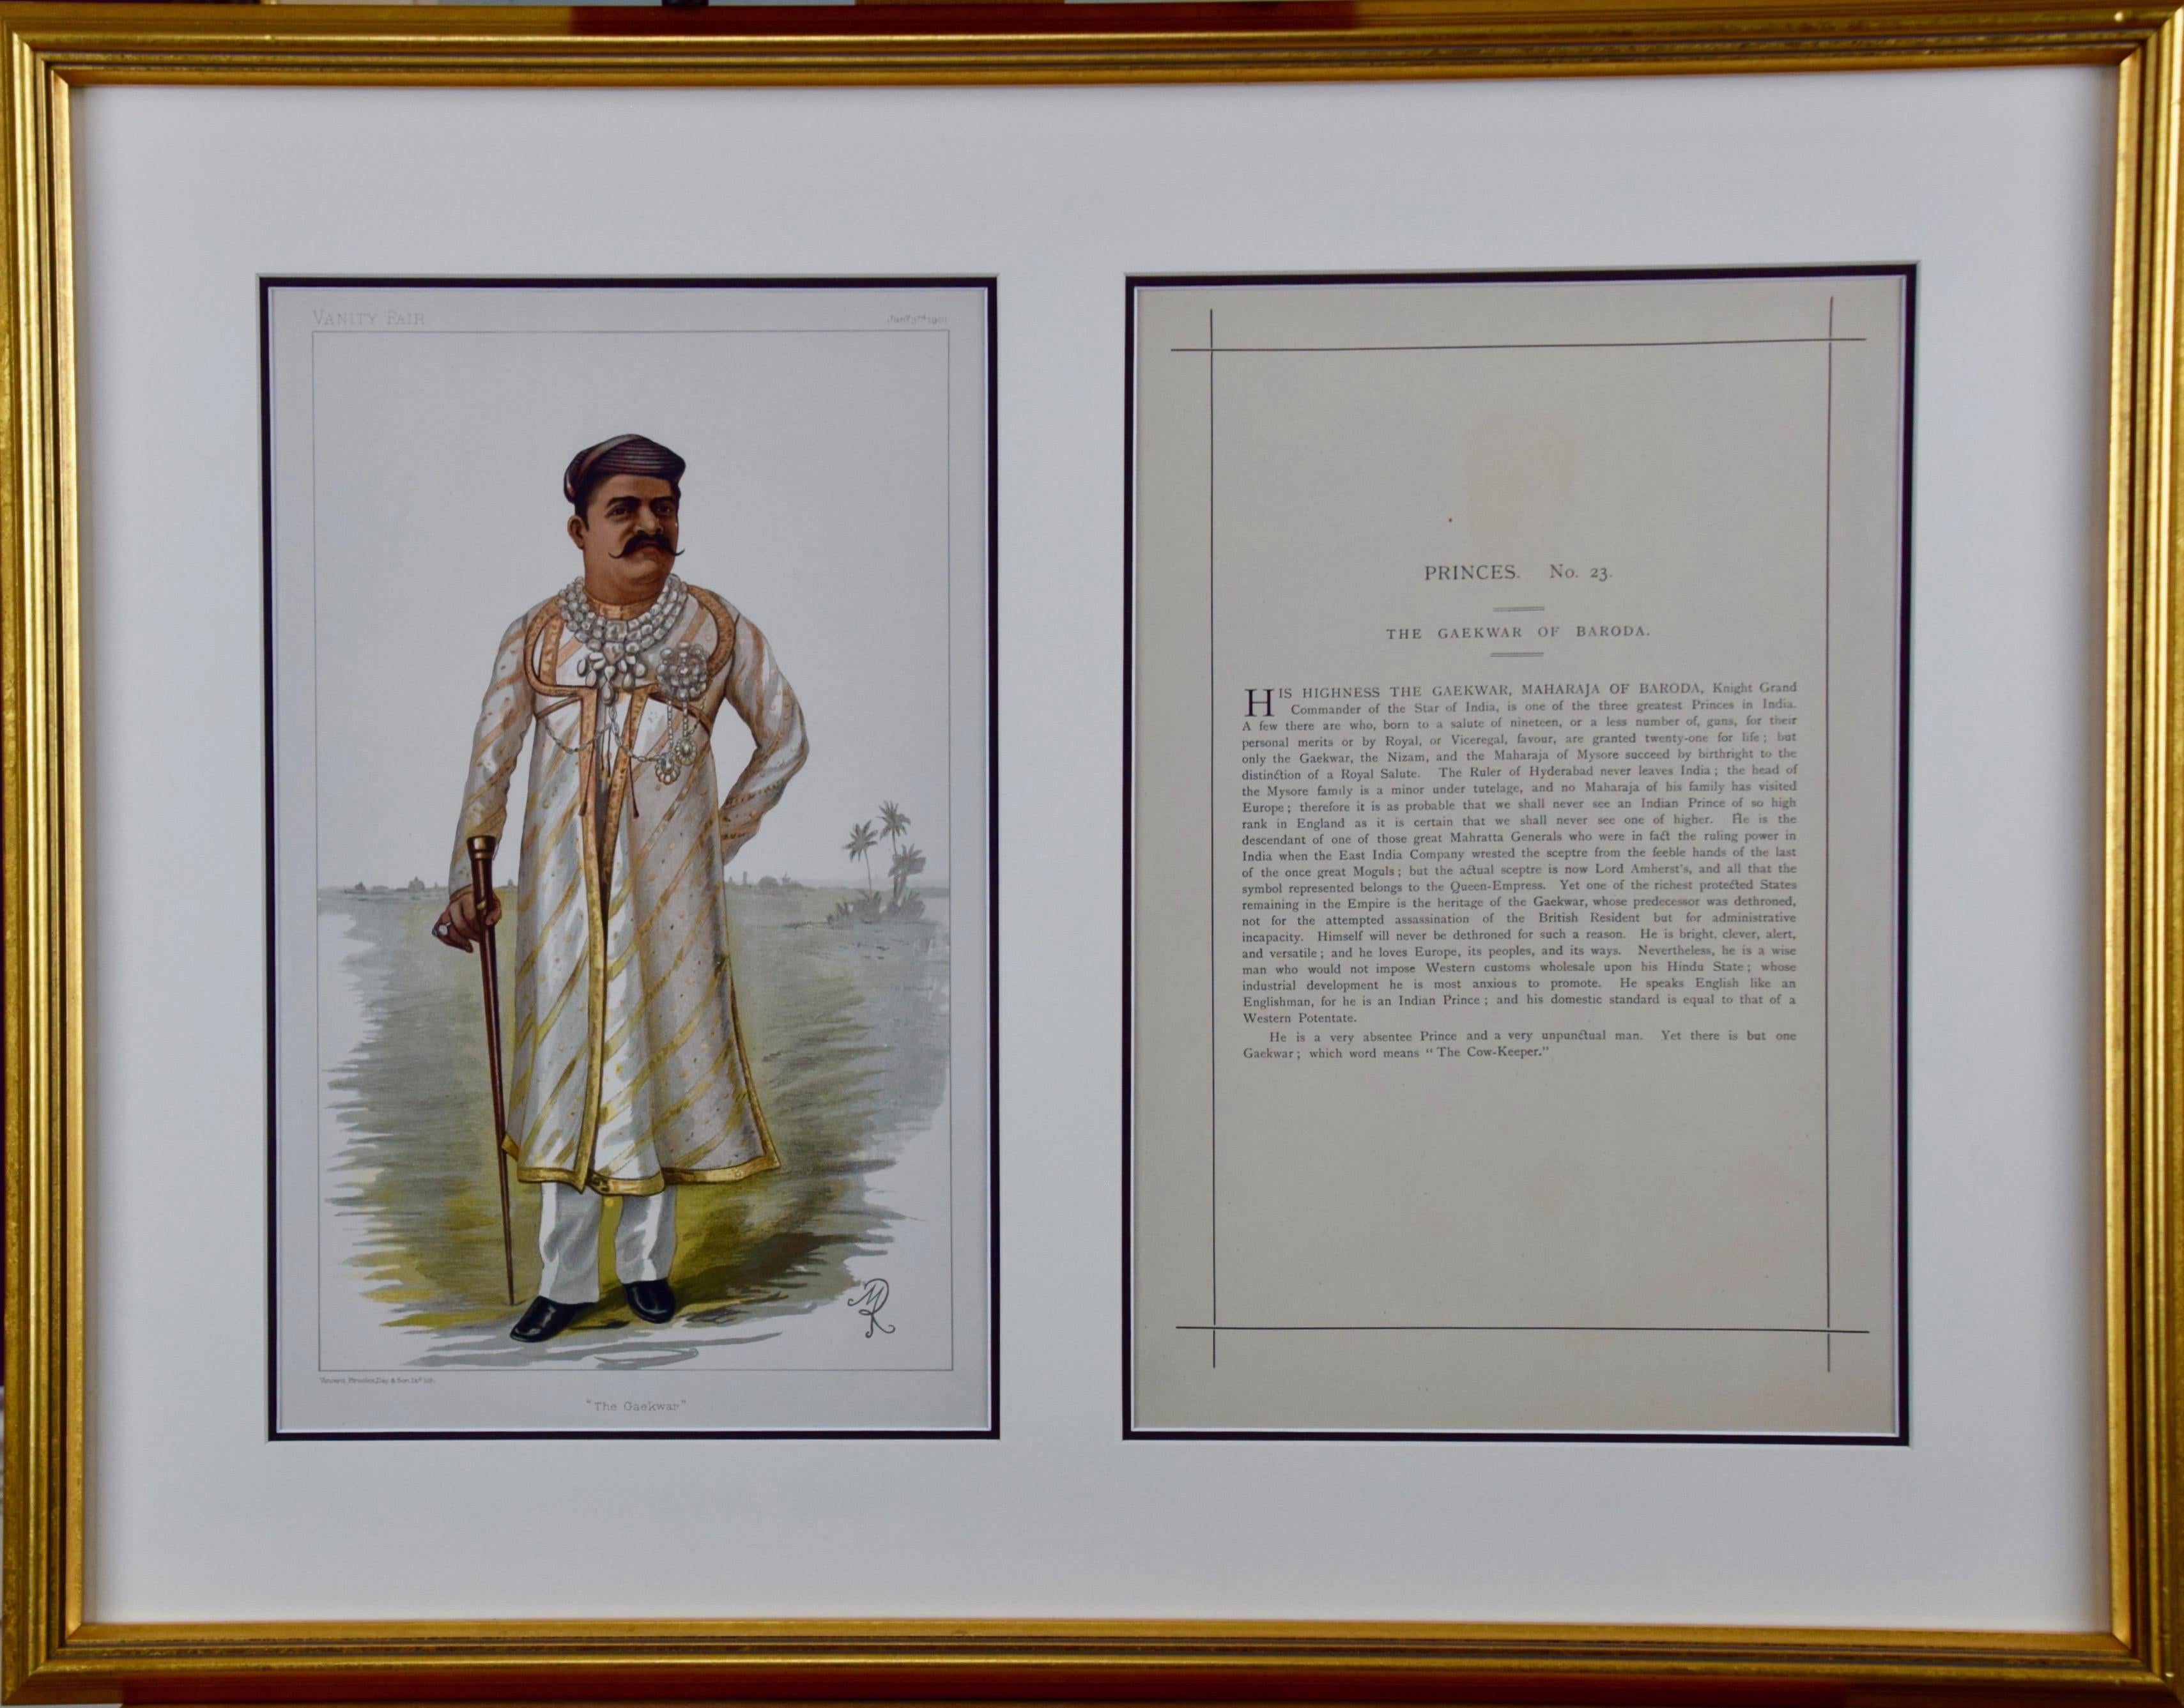 Unknown - Colored Vanity Fair Caricature of the "Gaekwar of Baroda" (Prince  of India) For Sale at 1stDibs